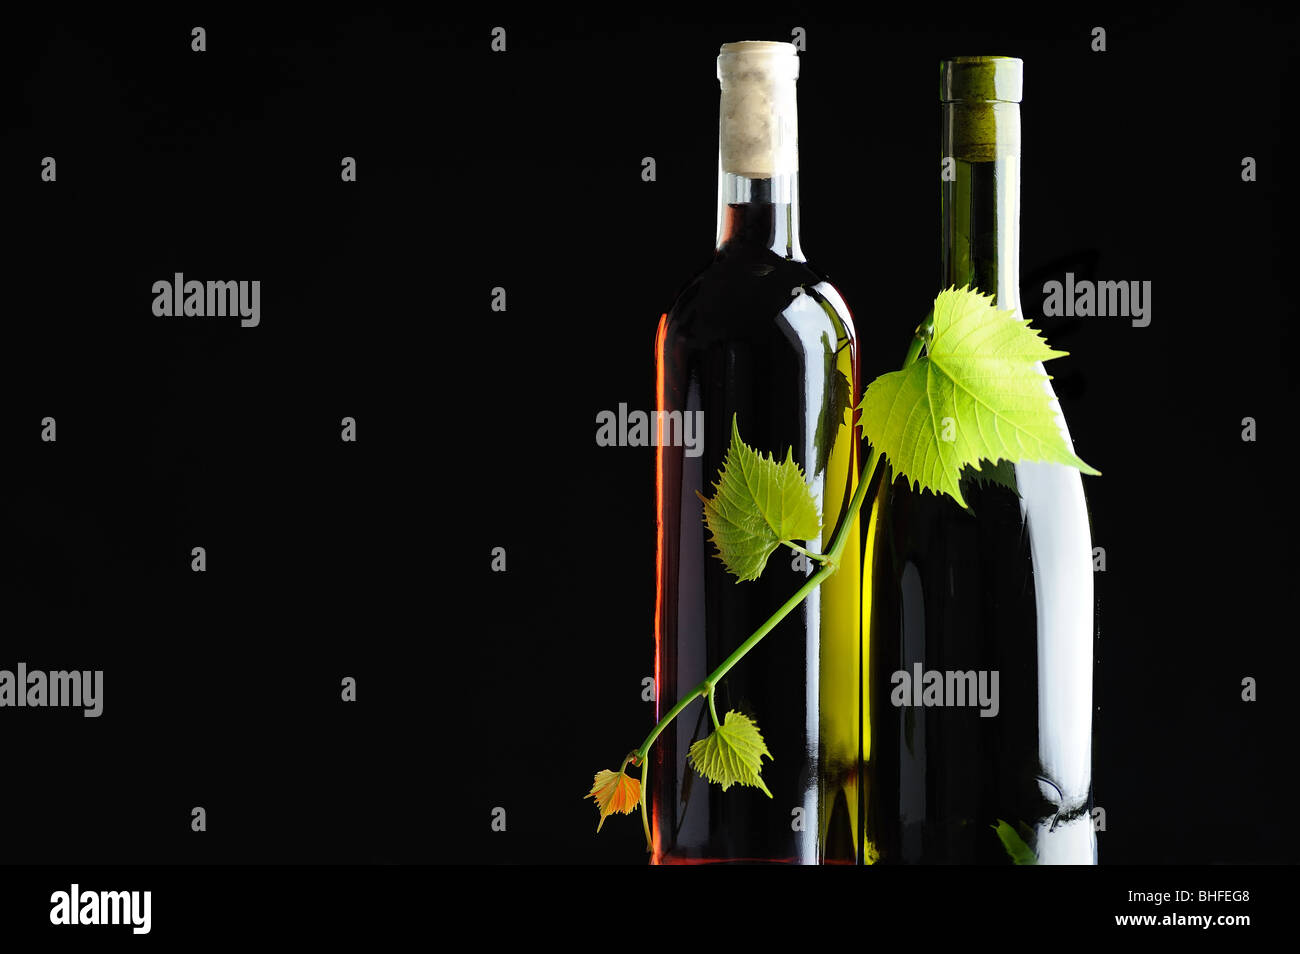 Two bottles wine twined by grapevine on black background Stock Photo